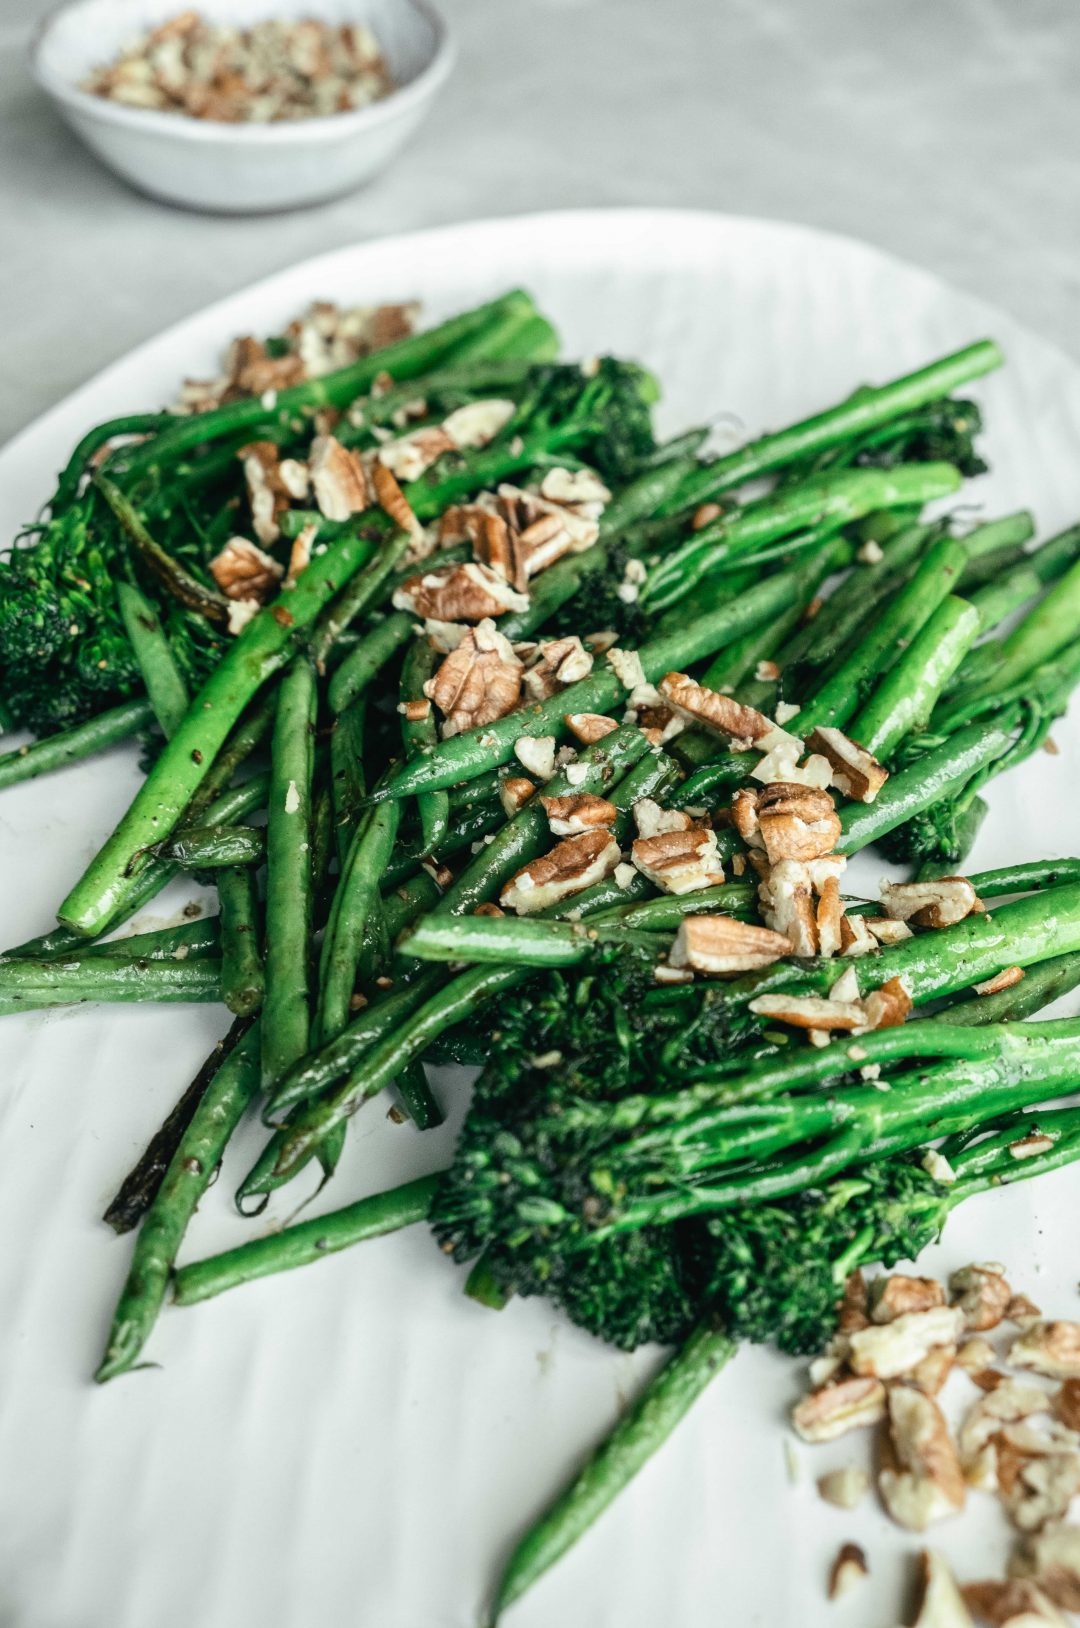 Seared greens with pecan nuts 1